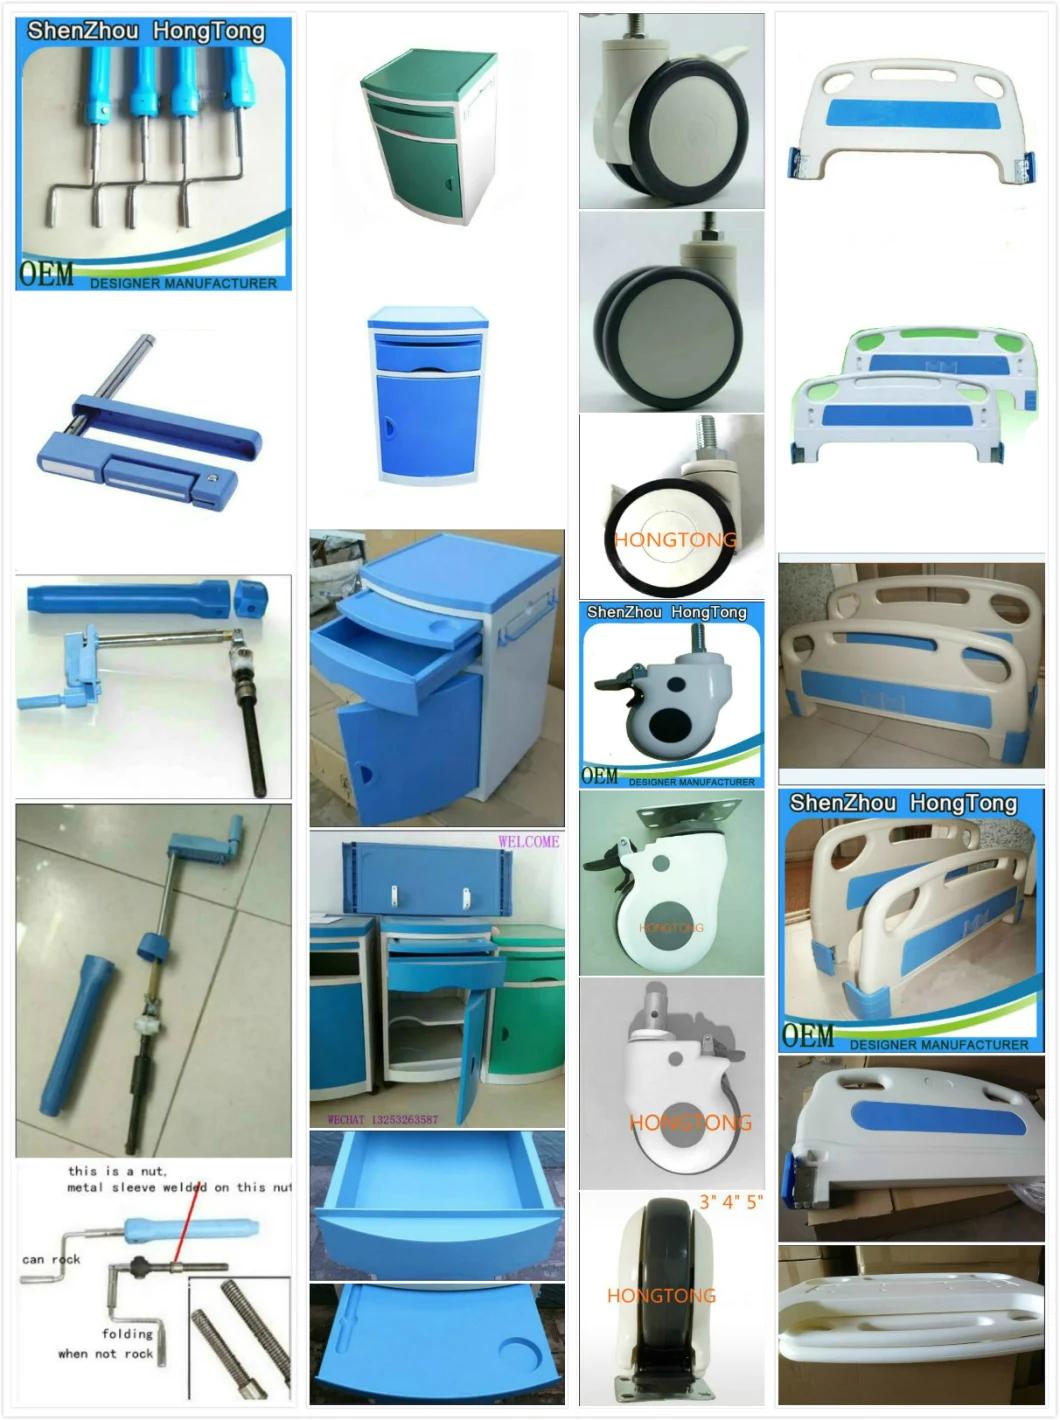 Retractable Crank Handle Accessories / Foldable Handle for Hospital Bed